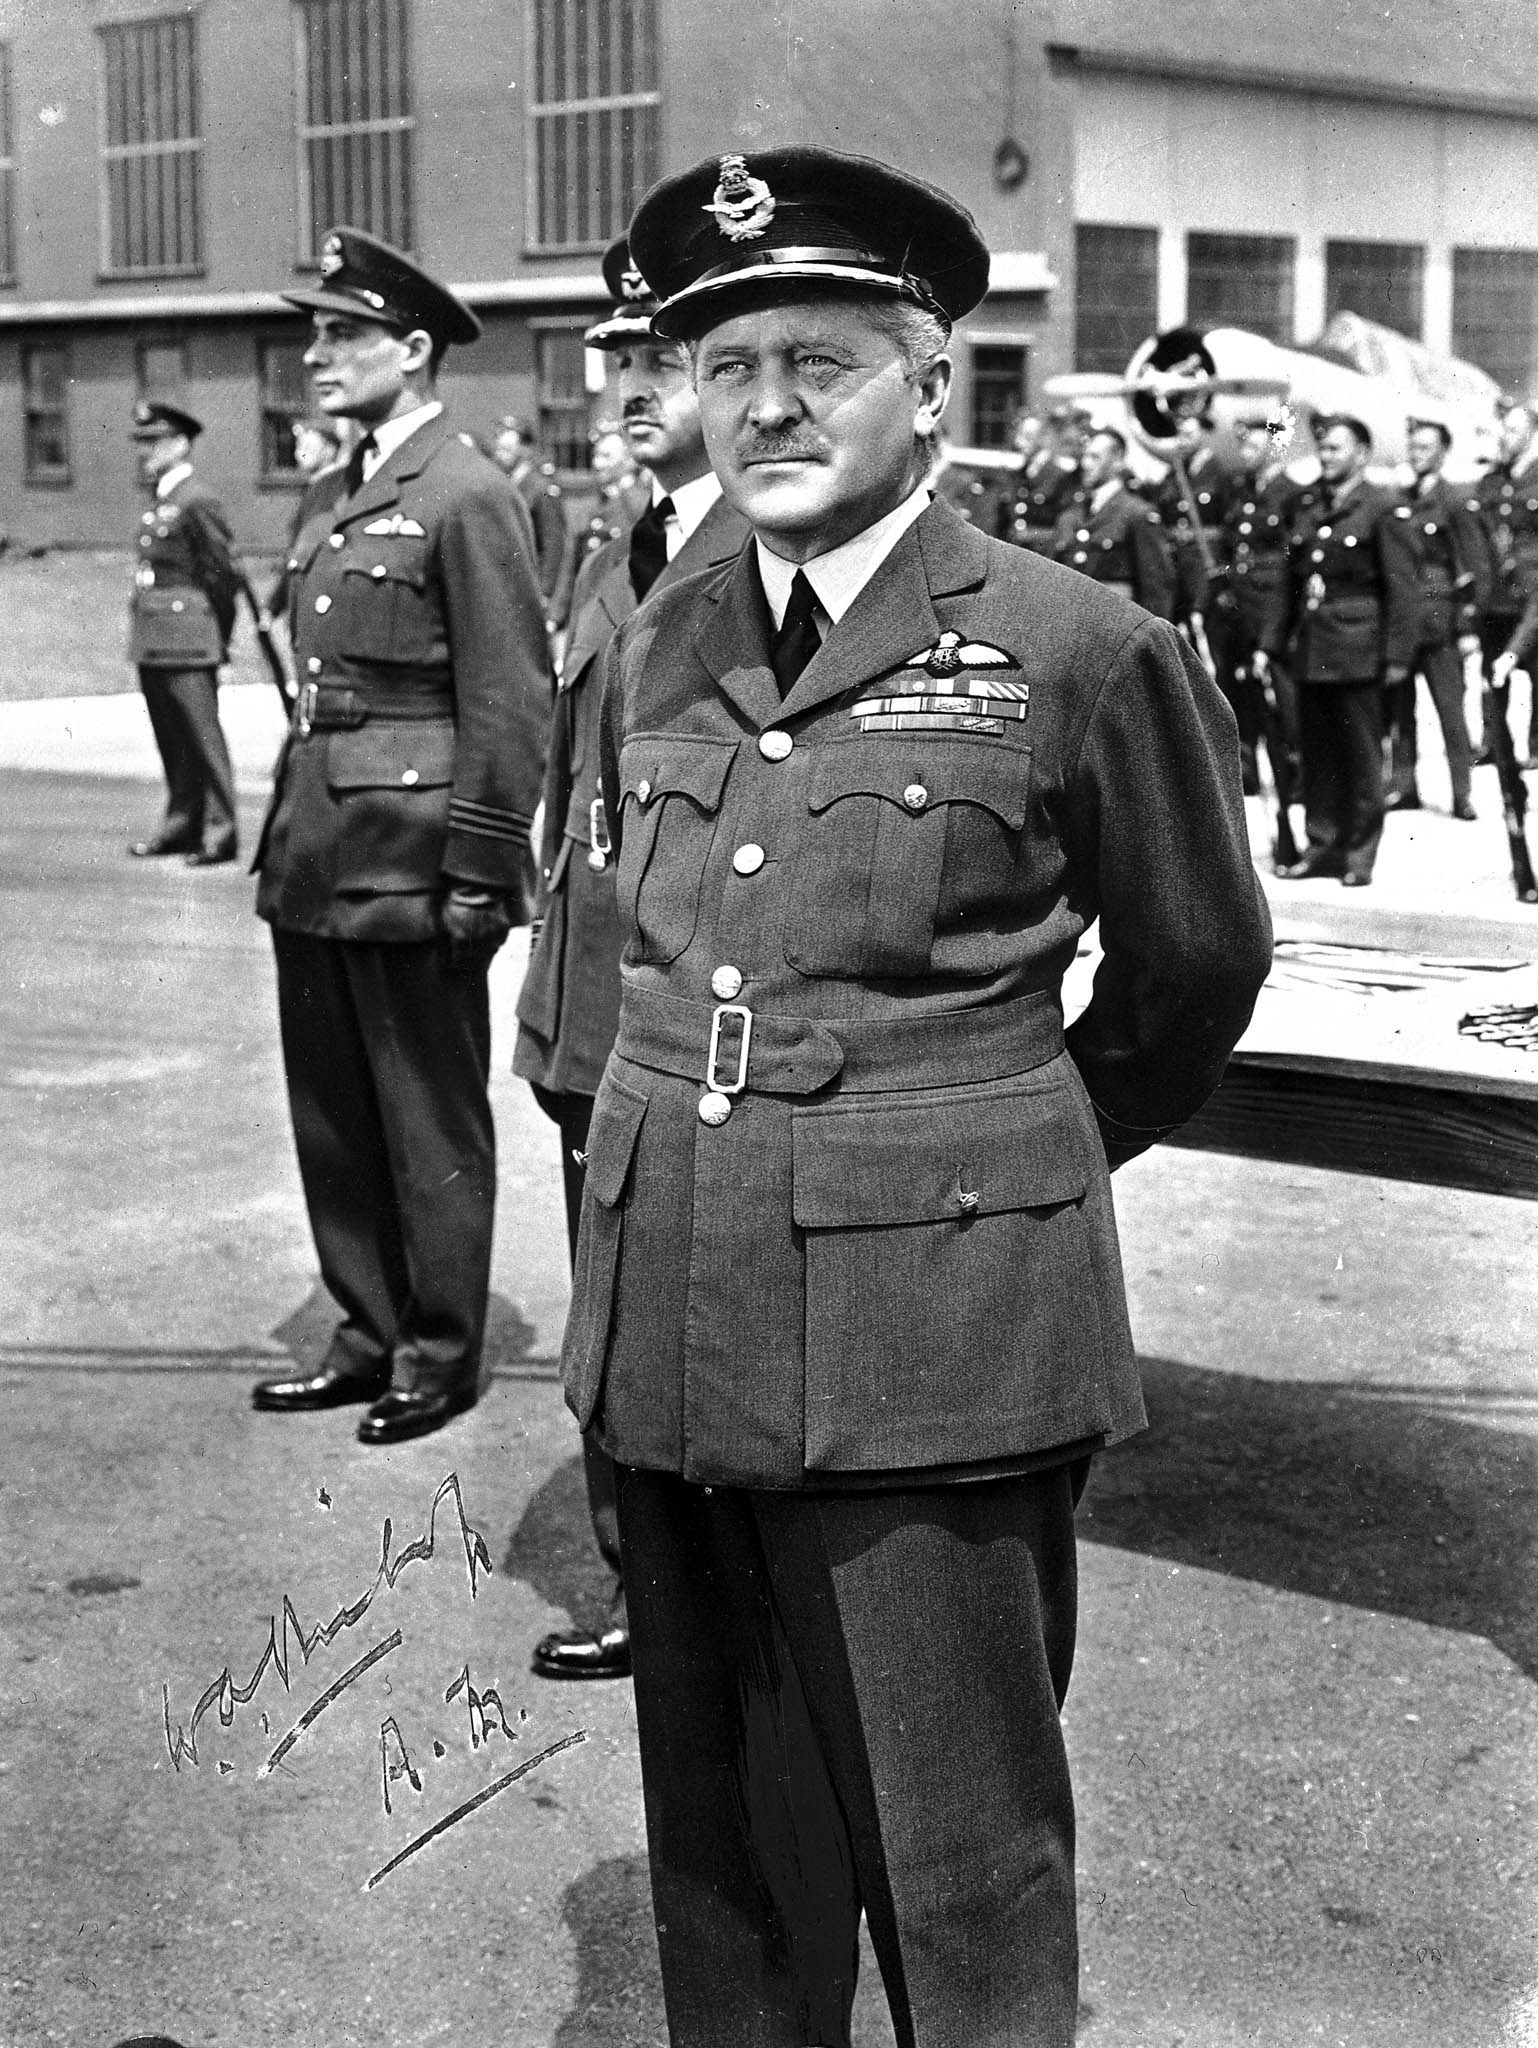 Air Marshal Billy Bishop is on parade during the filming of “Captains of the Clouds” at Uplands in Ottawa, Ontario, on April 5, 1943. During the film, Air Marshal Bishop, playing himself, presented wings to real graduates of No. 2 Service Flying Training School. PHOTO: DND